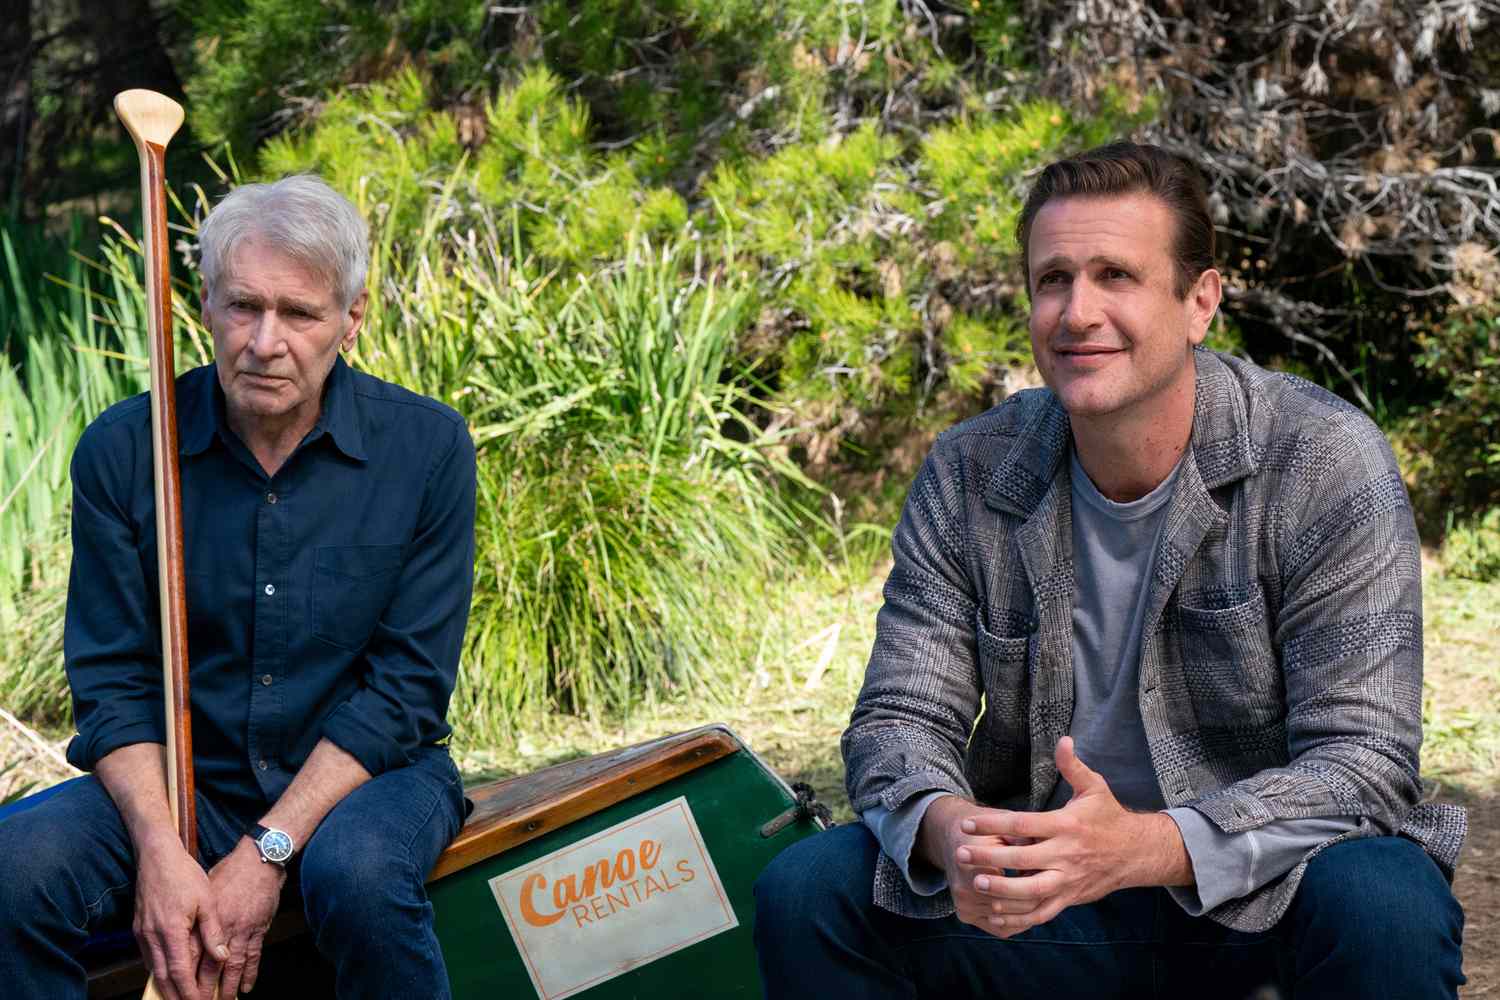 'Shrinking' Season 2 Gets Premiere Date as Jason Segel, Harrison Ford Return for More Therapy and Adventures